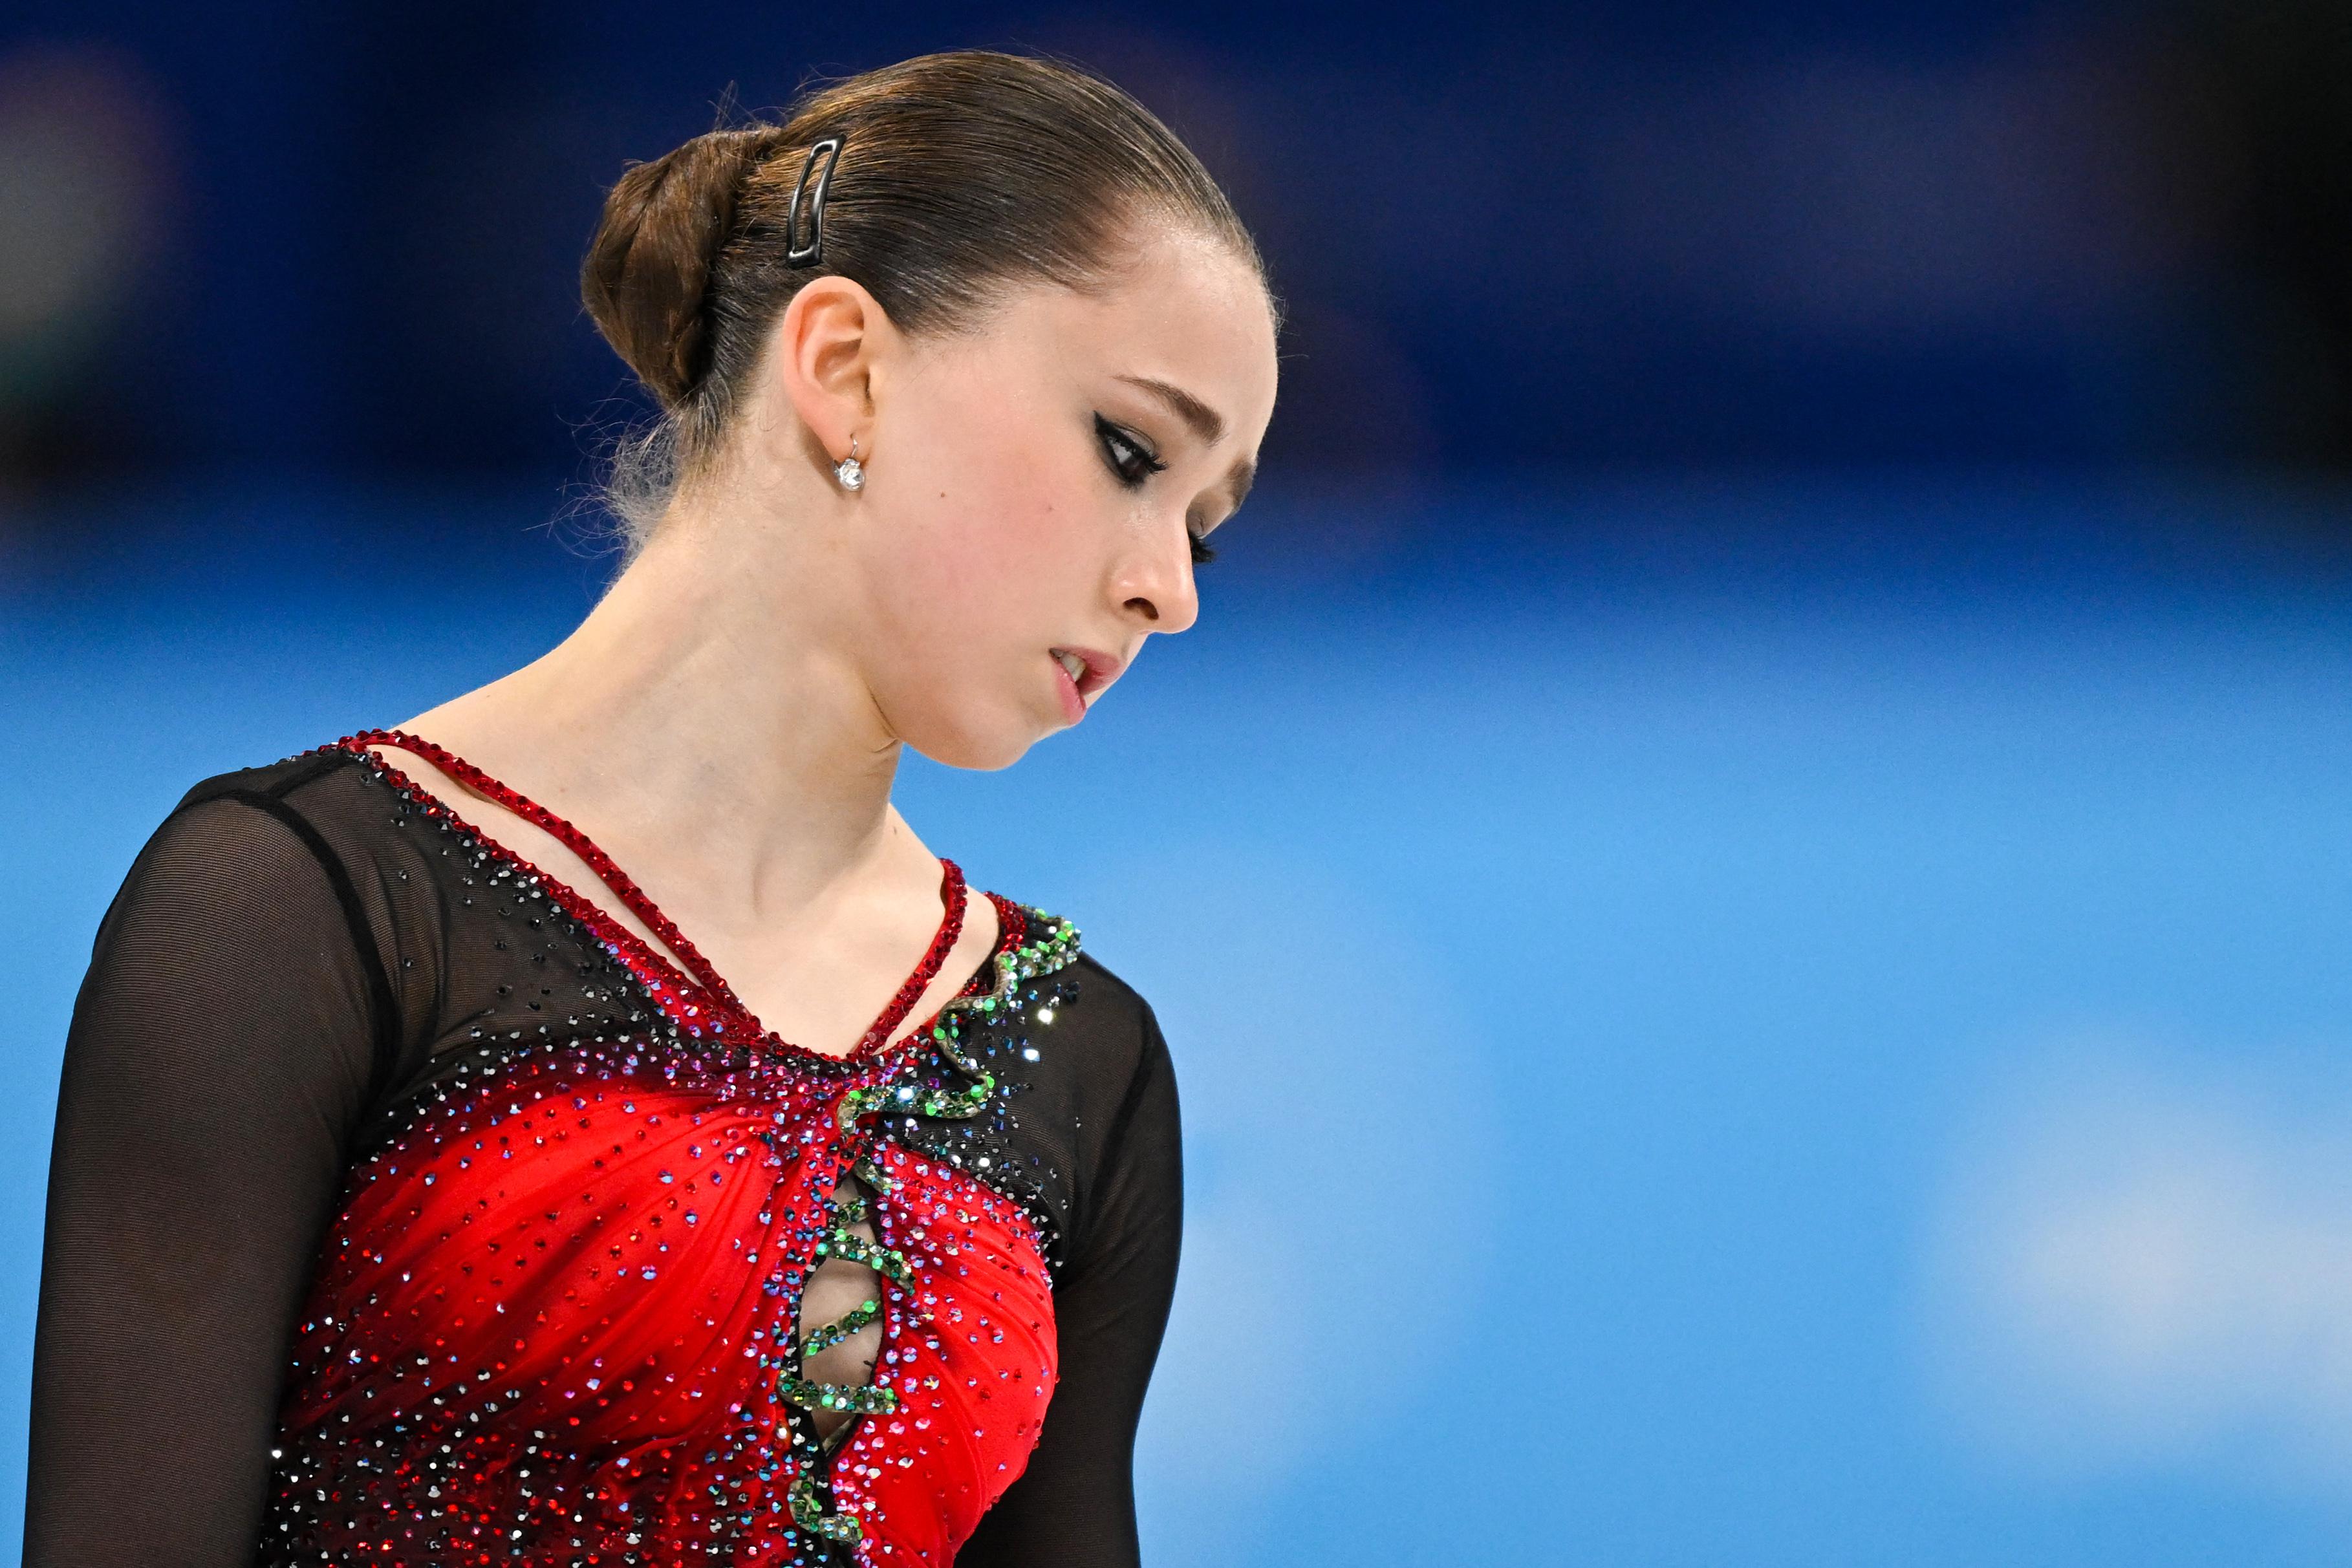 Valieva looks down at the ice in disappointment